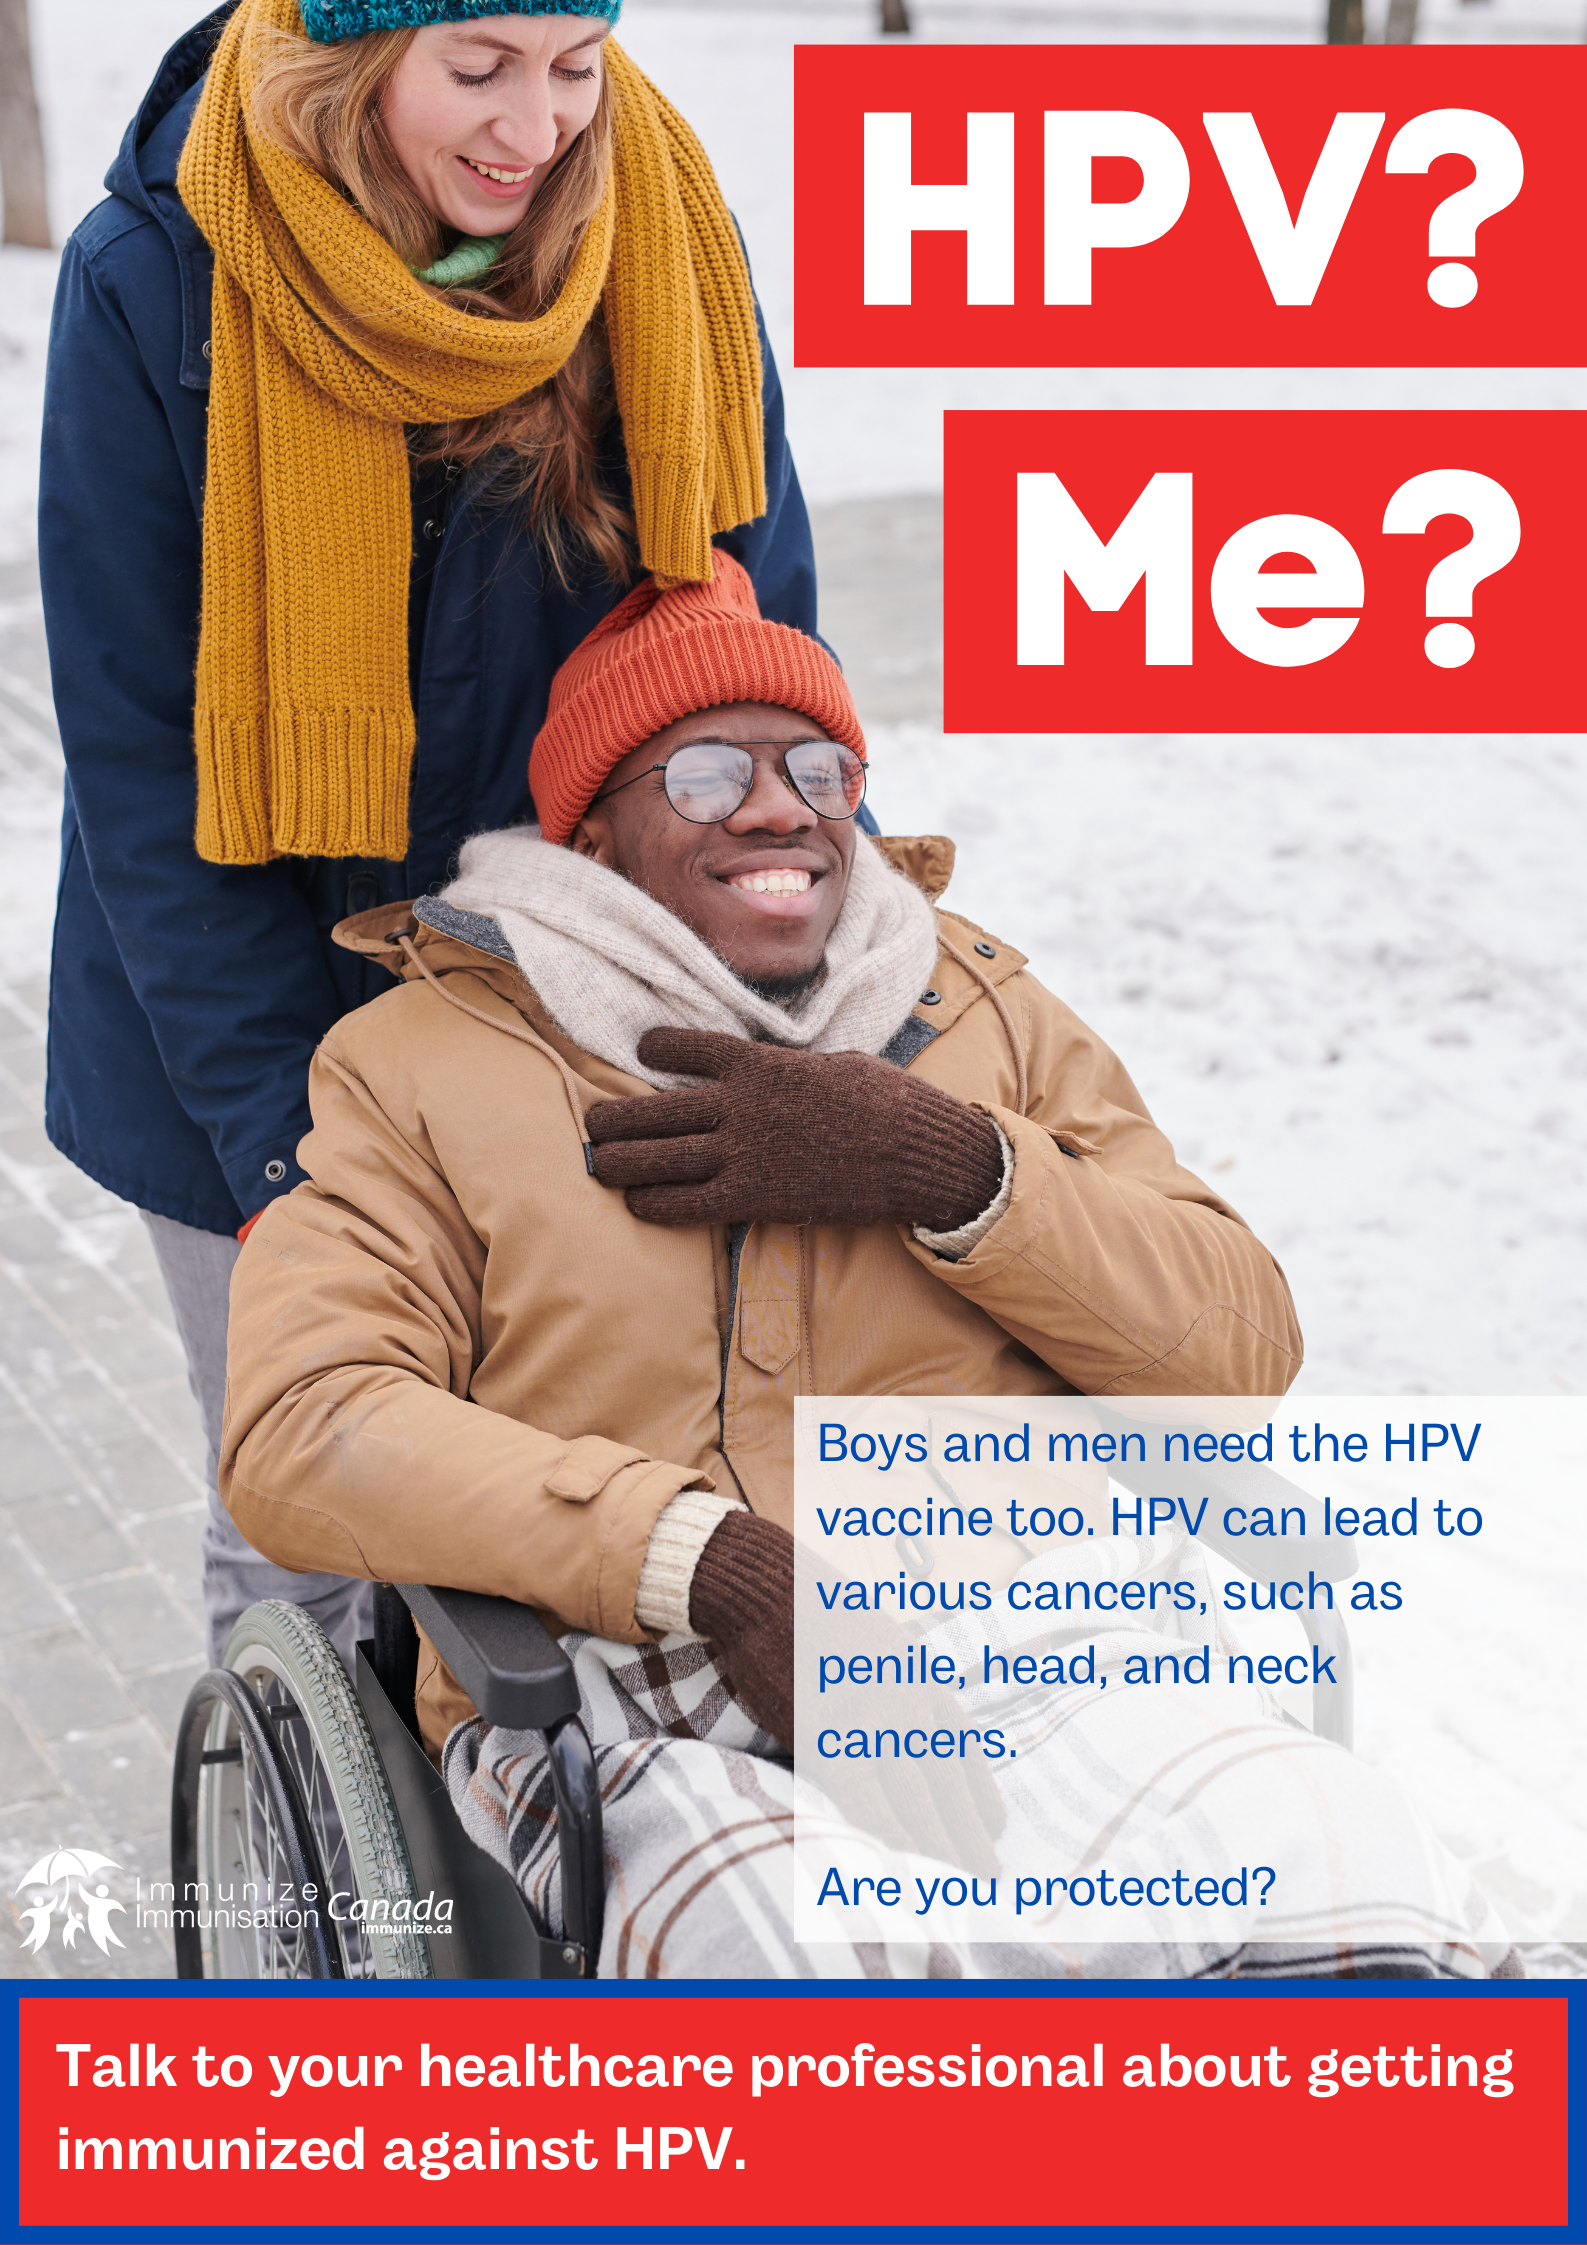 HPV? Me? (poster 7)